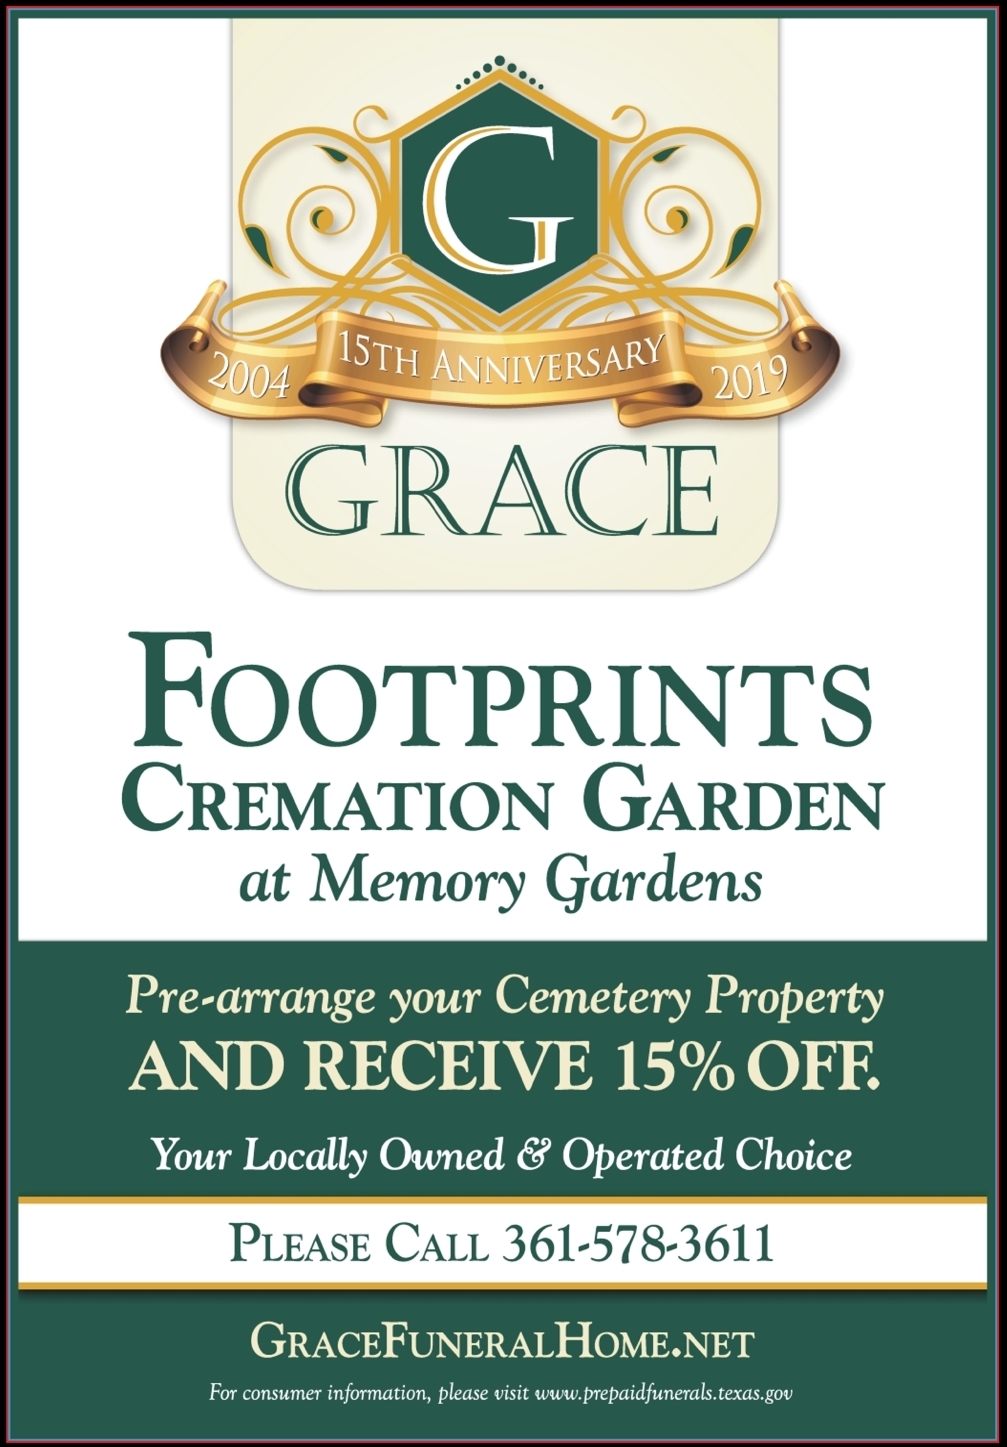 Trust Grace Funeral Home The Personal Touch When You Plan